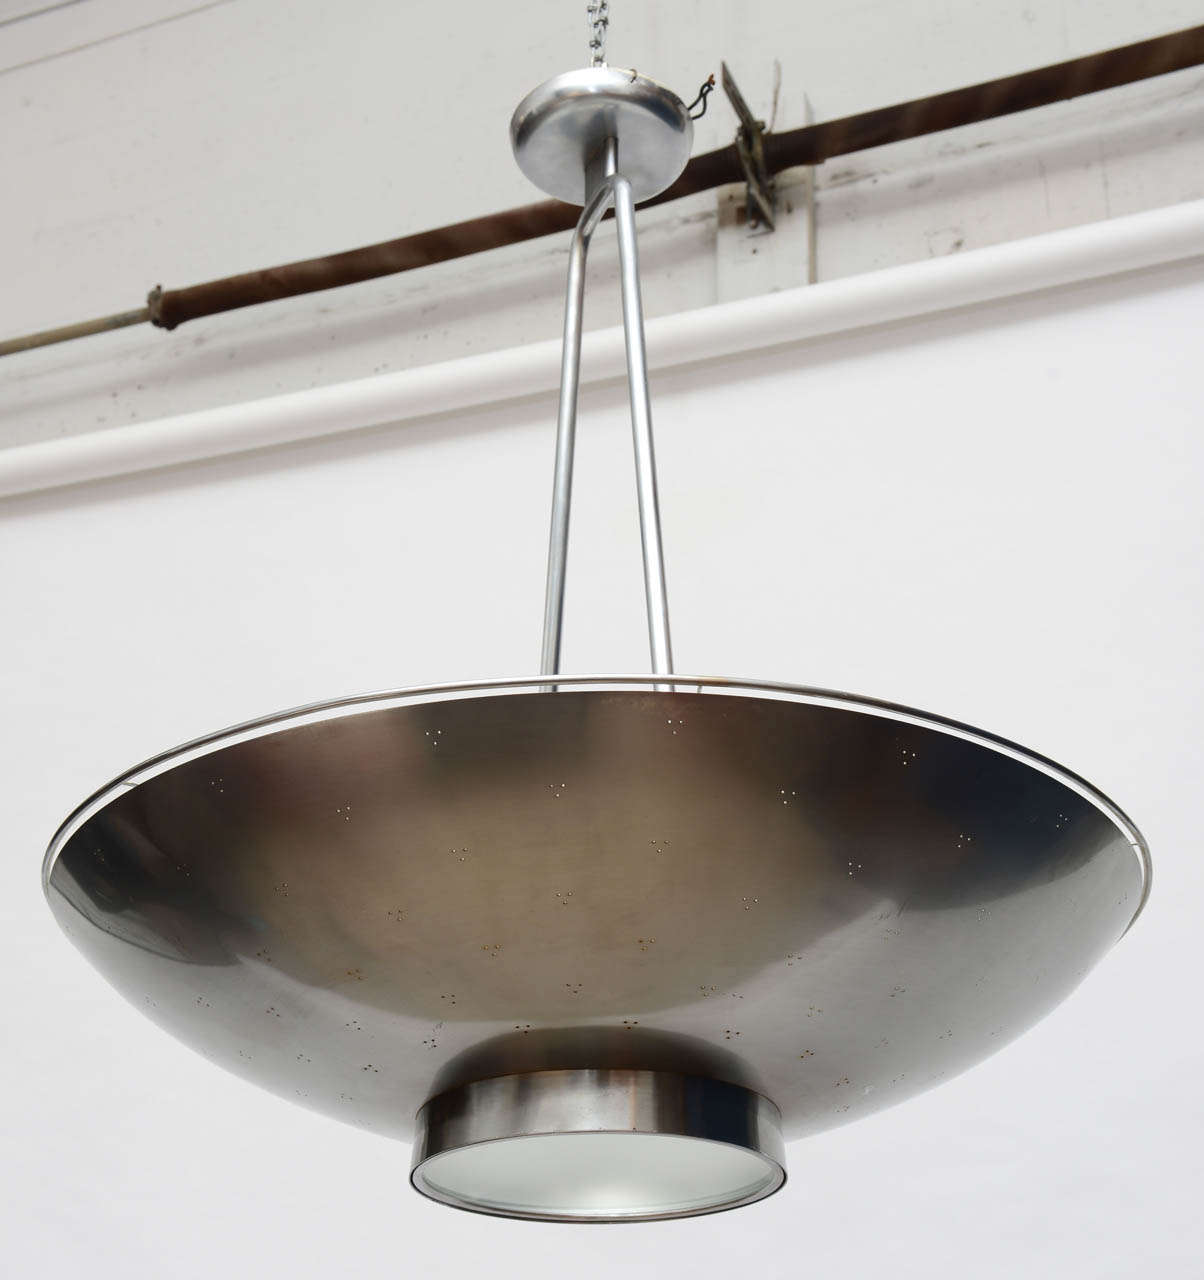 A rare Example of Finnish Lighting.
Plated brass.a delicate banded gallery and monumental size are the unusual design components exhibited.